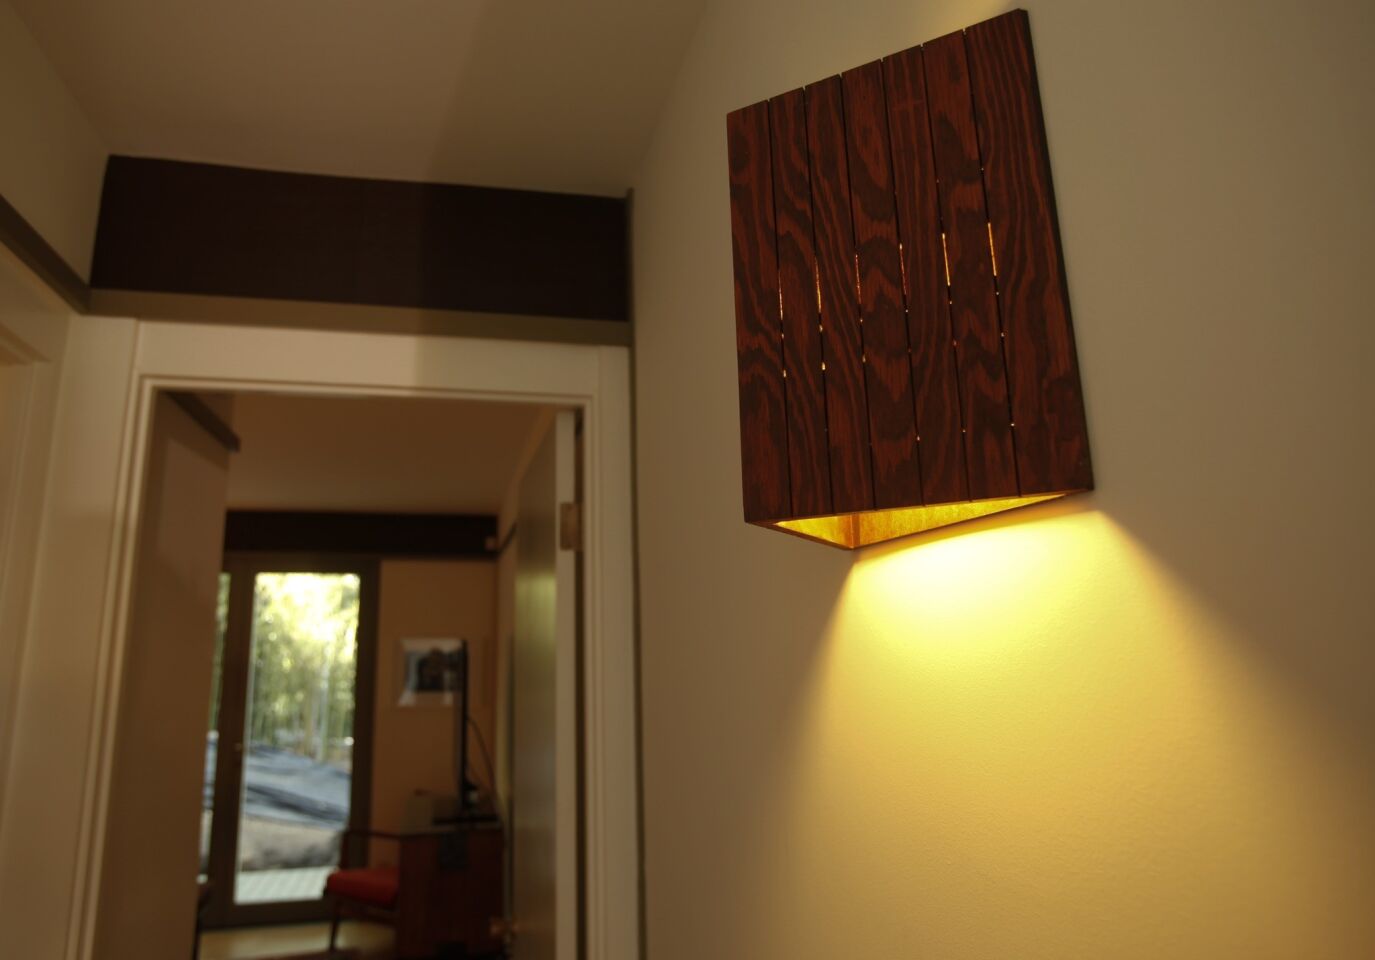 A triangular wood sconce in the hallway.